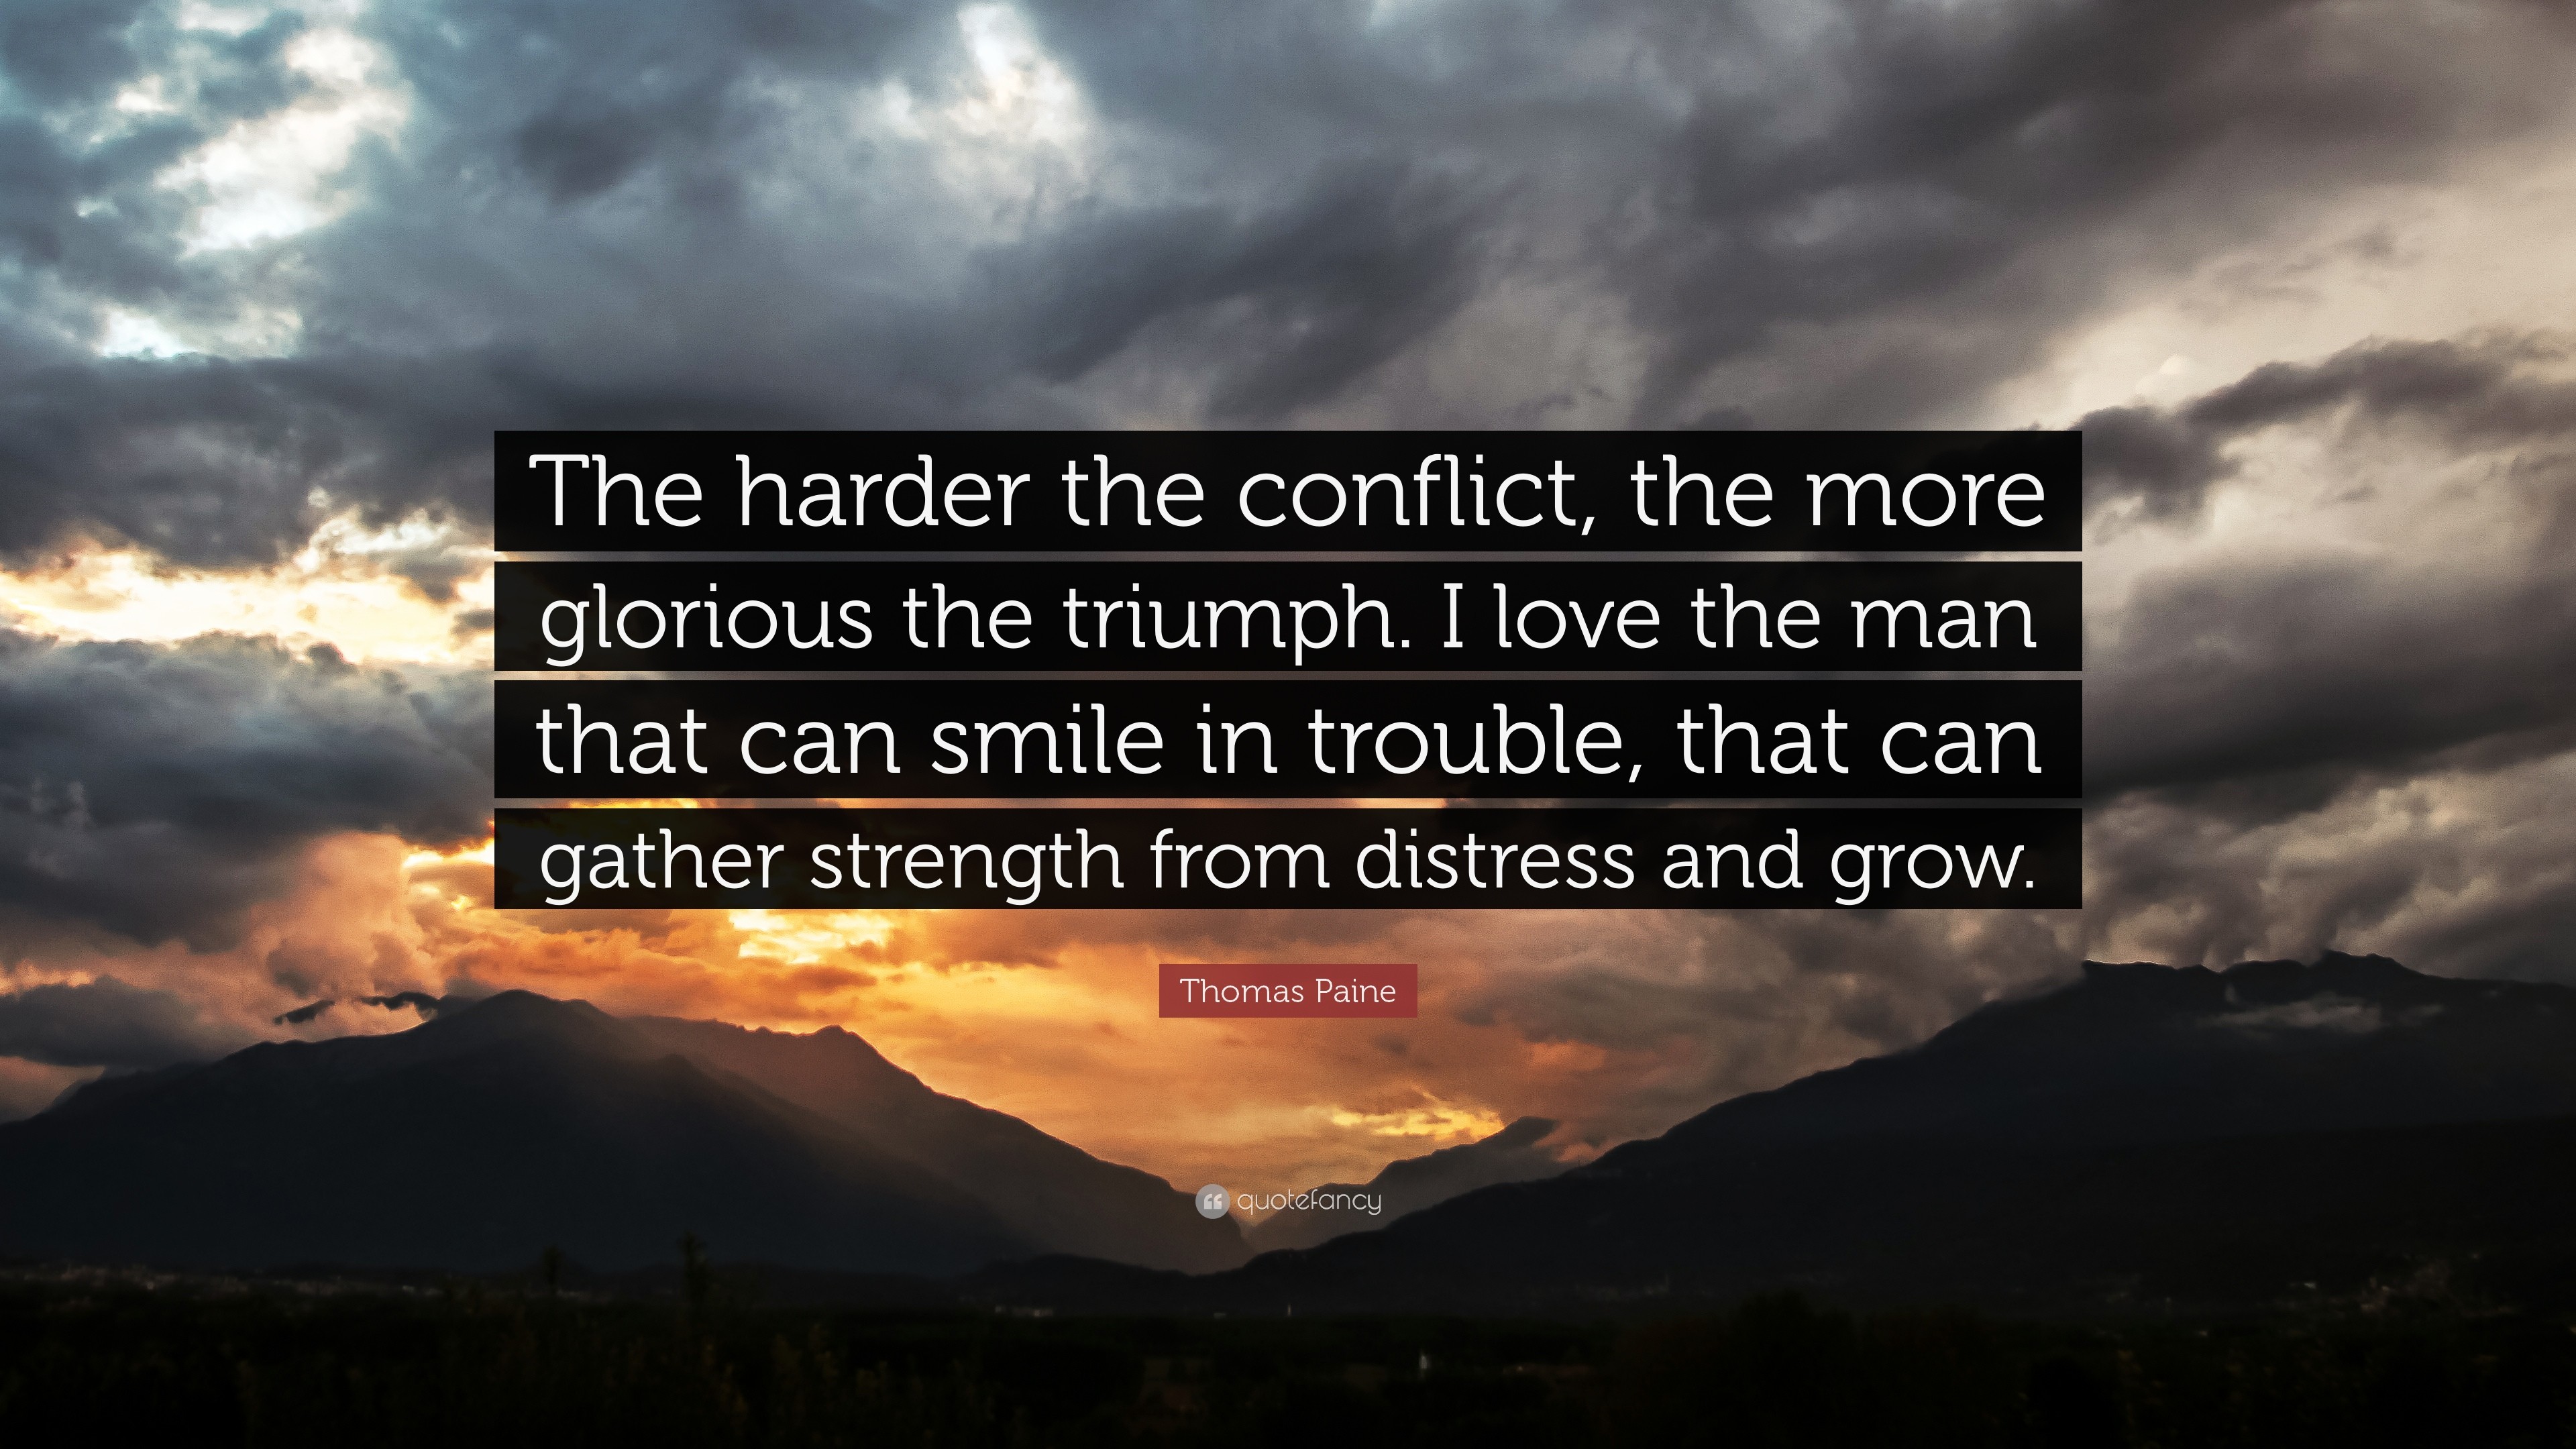 3840x2160 Thomas Paine Quote: “The harder the conflict, the more glorious the triumph.